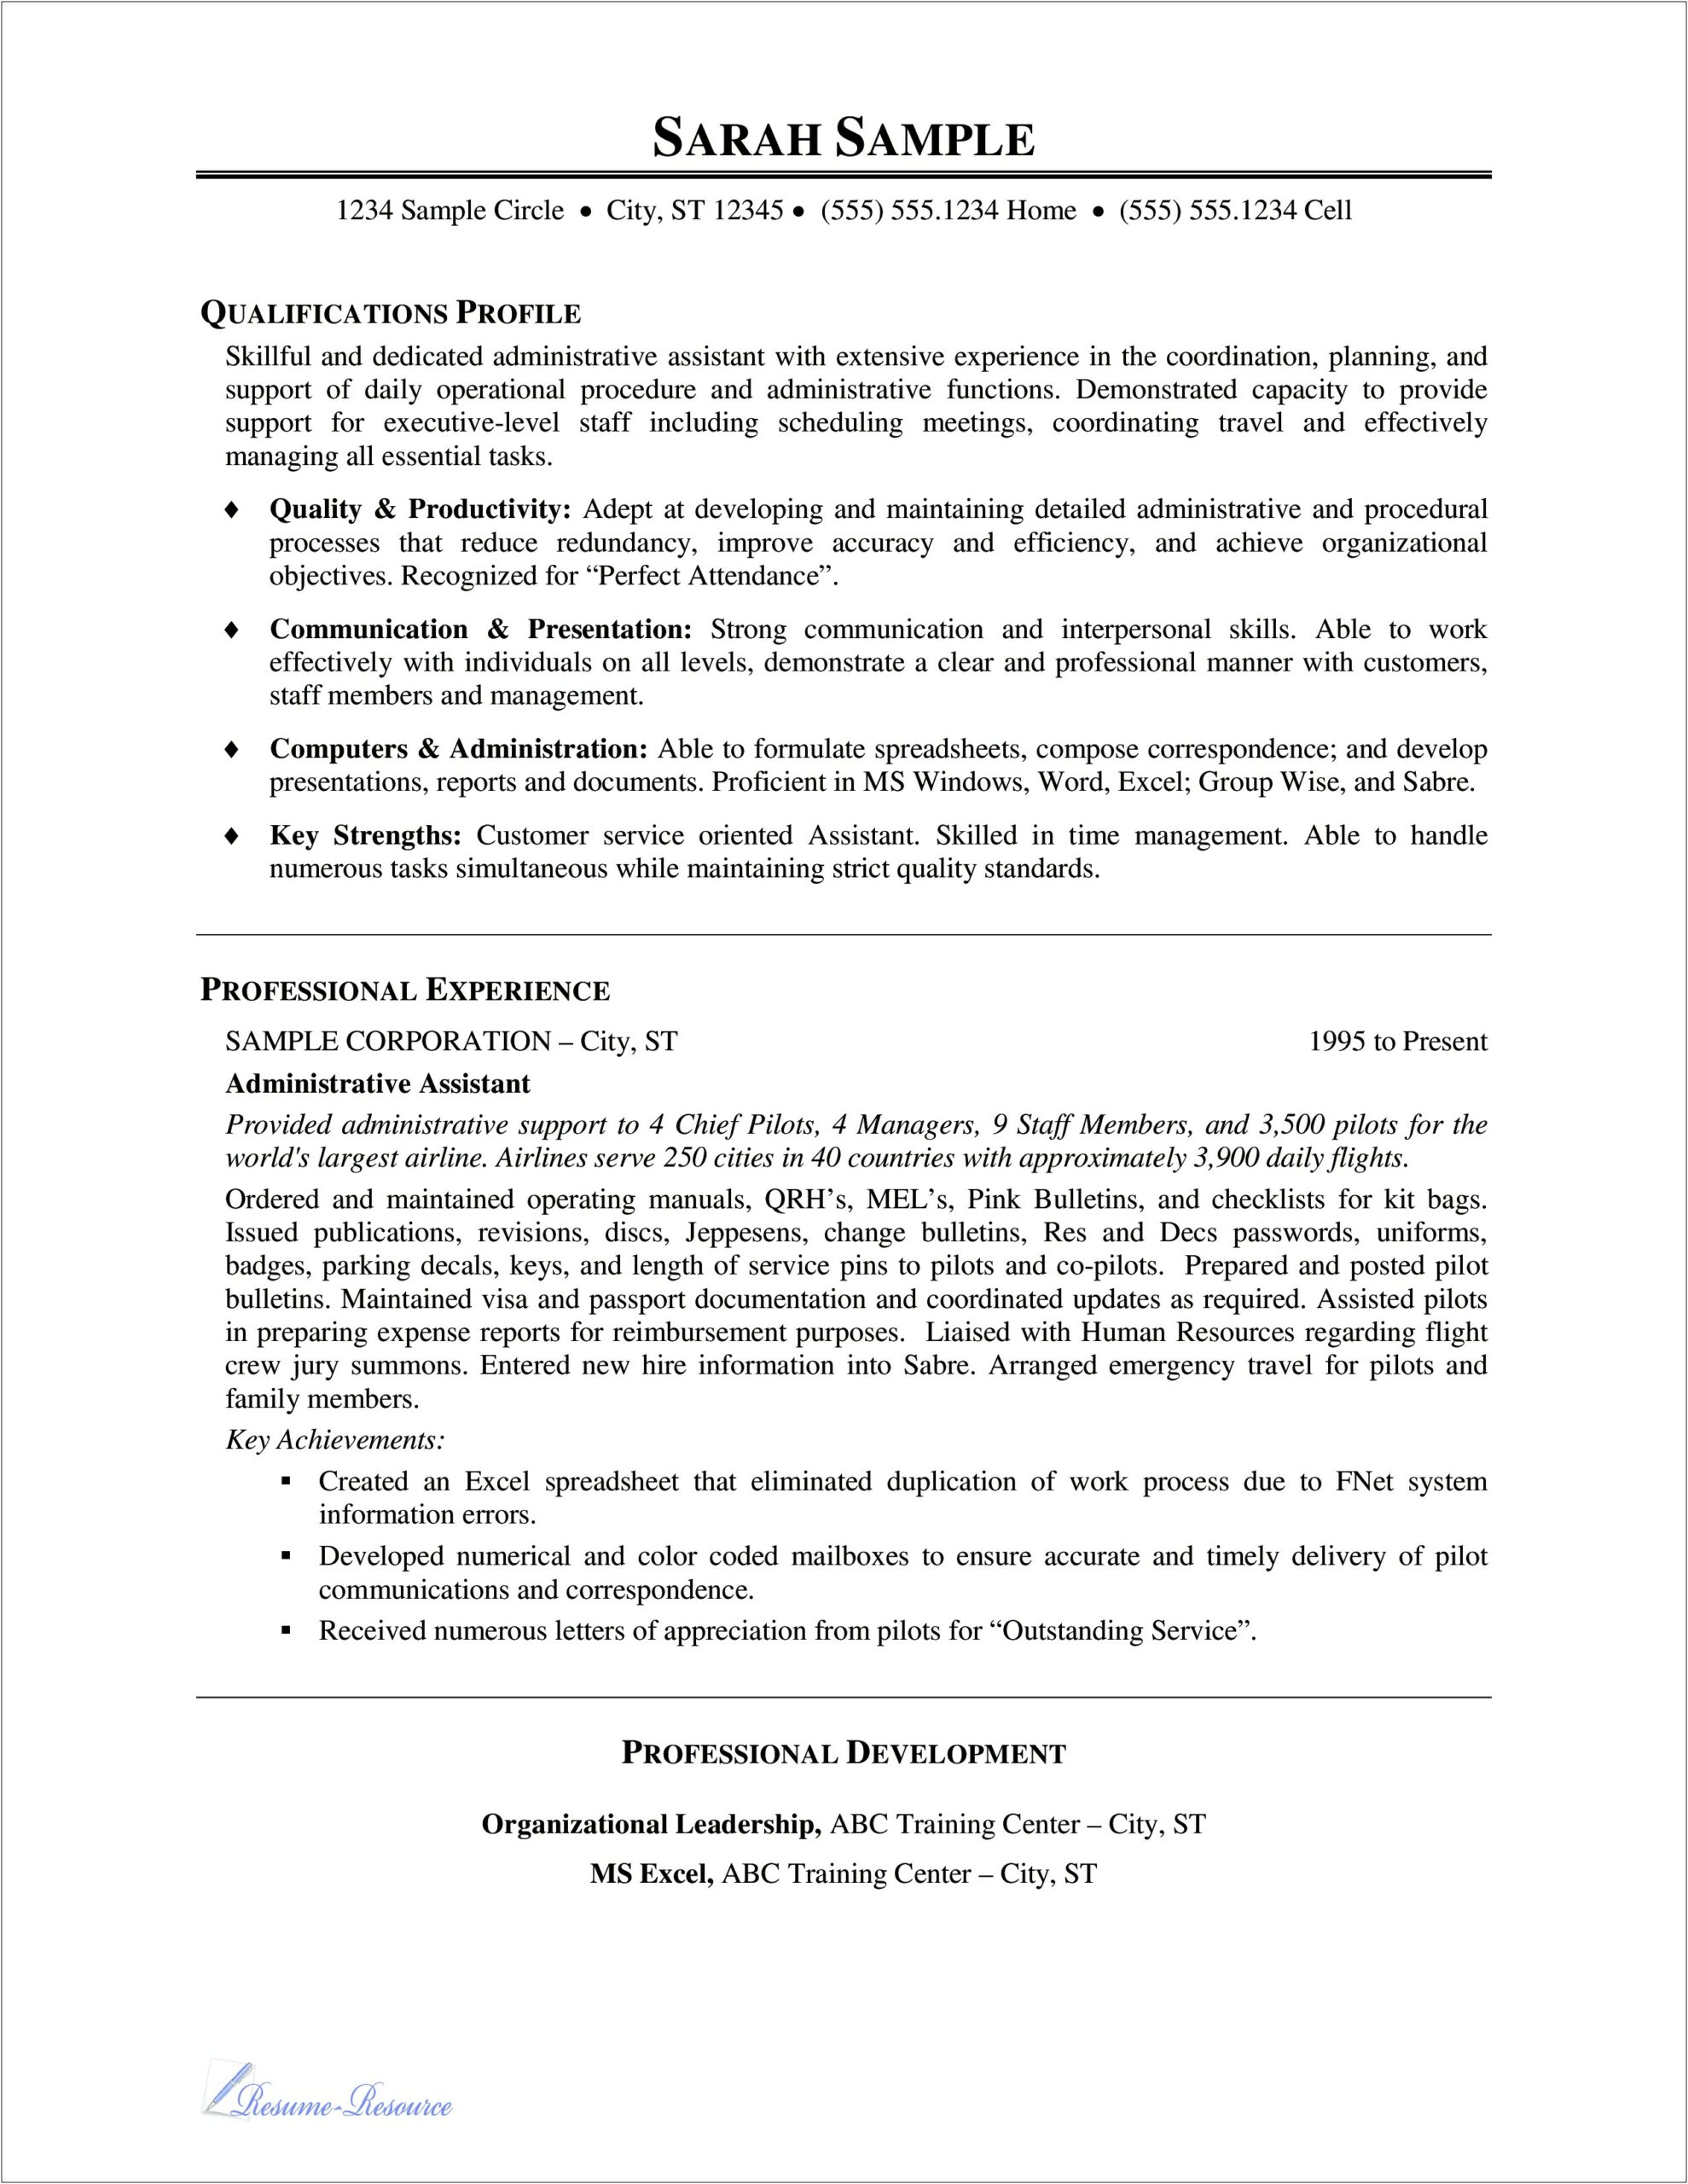 Administrative Assistant Resume Summary Of Qualifications